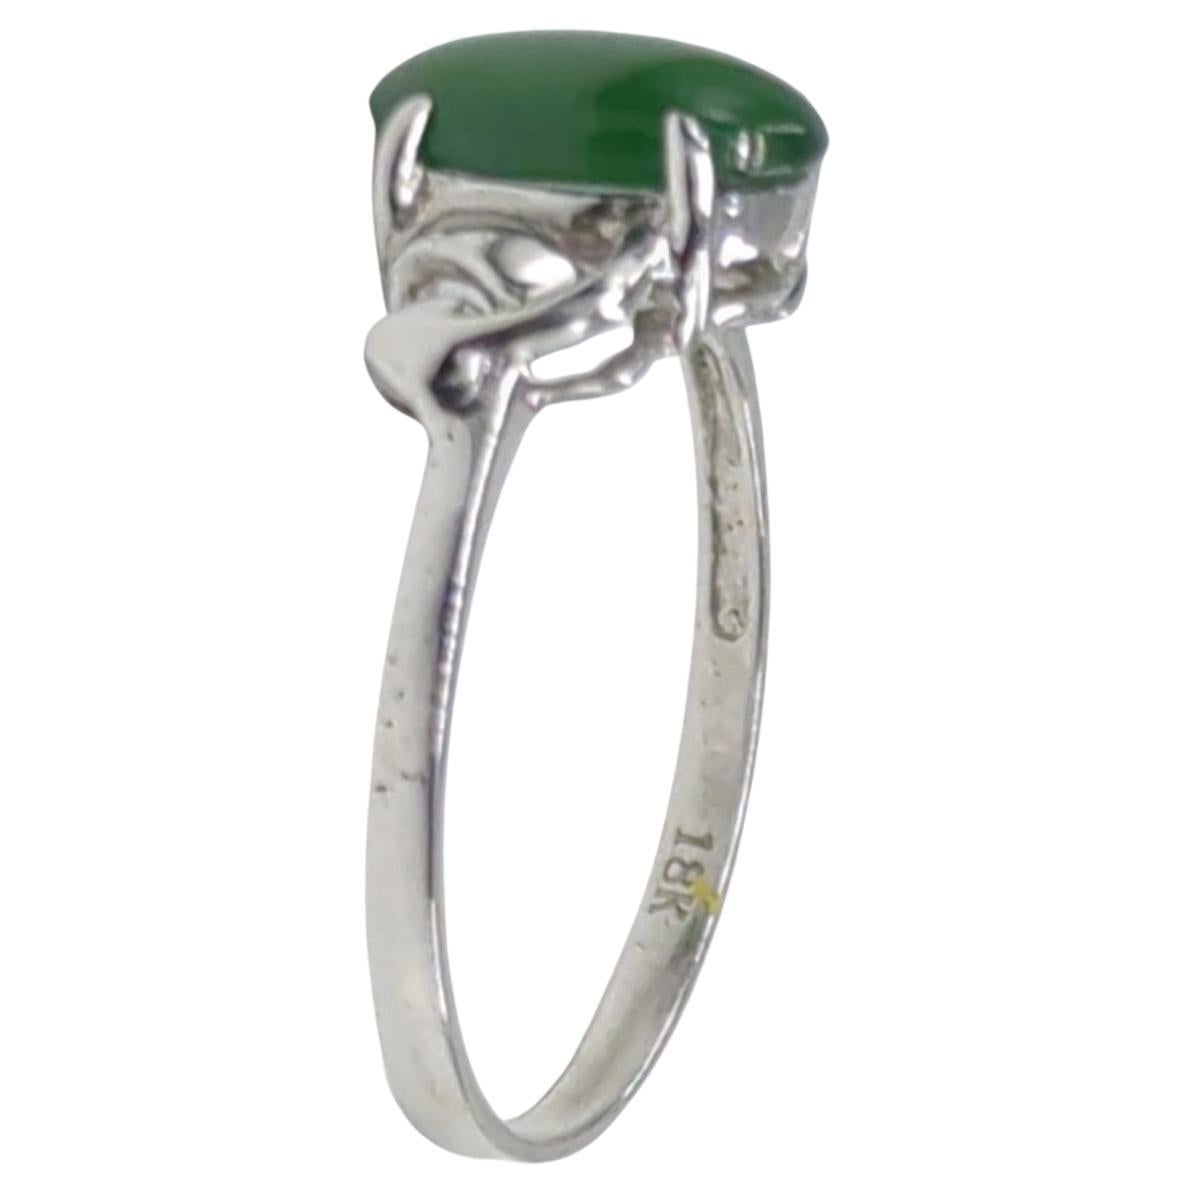 Women's 18K White Gold Translucent Deep Green Cabochon Jadeite Ring A-Grade Size 6 For Sale